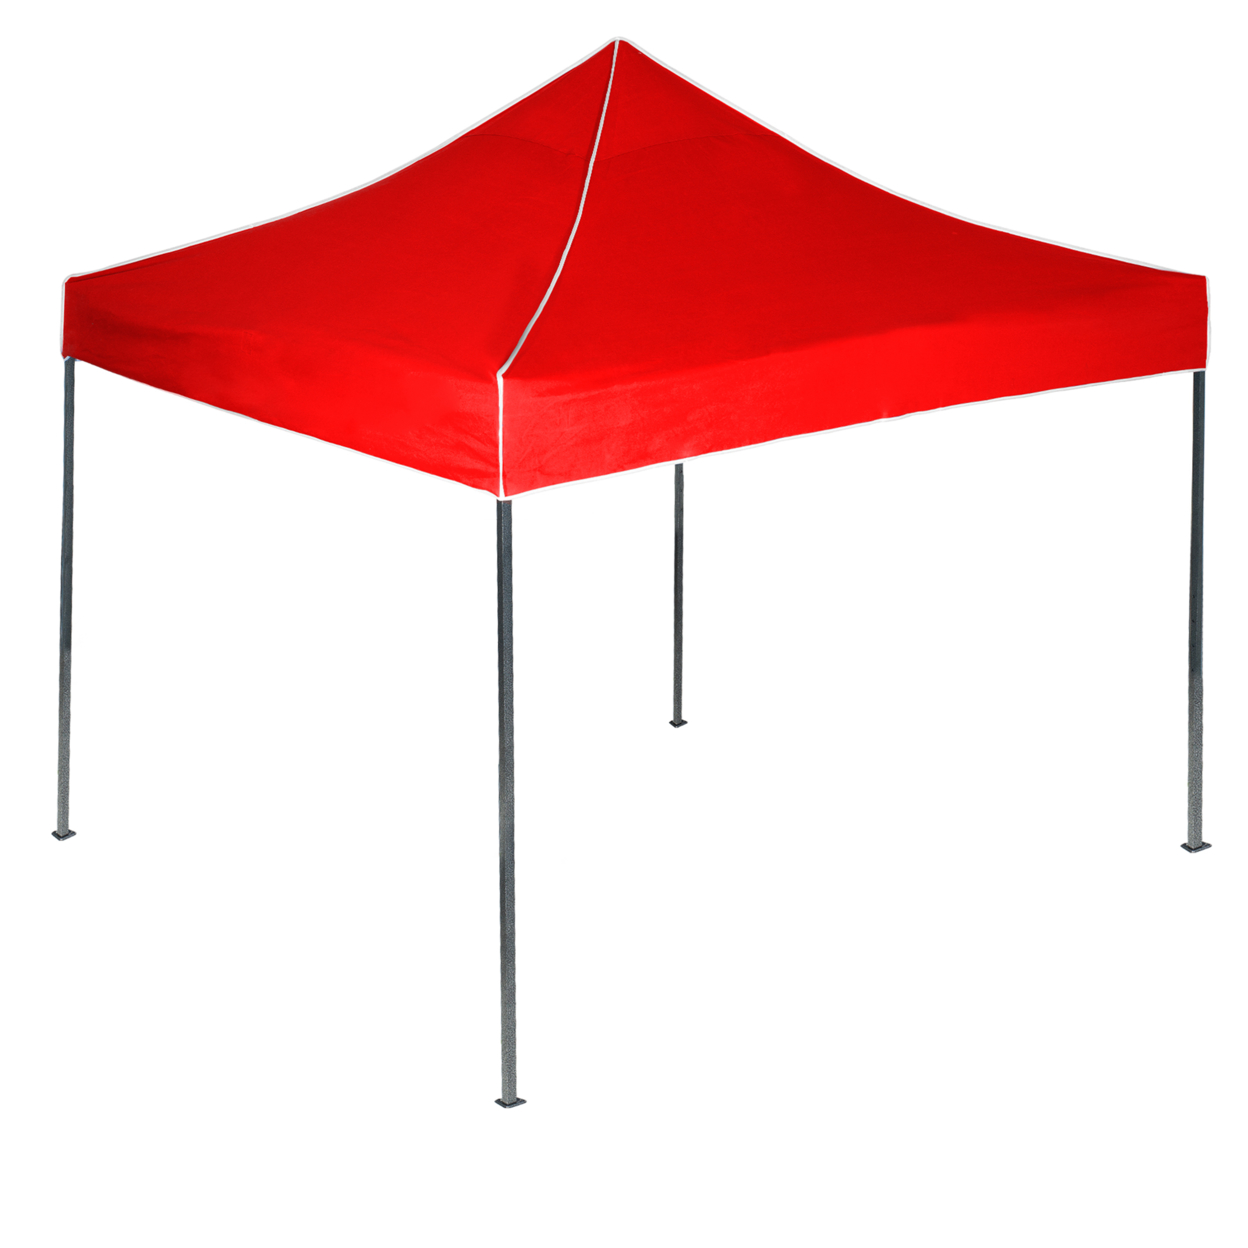 Red Top Pop-Up Instant Canopy Tent - 10' X 10' - Large Outdoor Backyard Party Tent